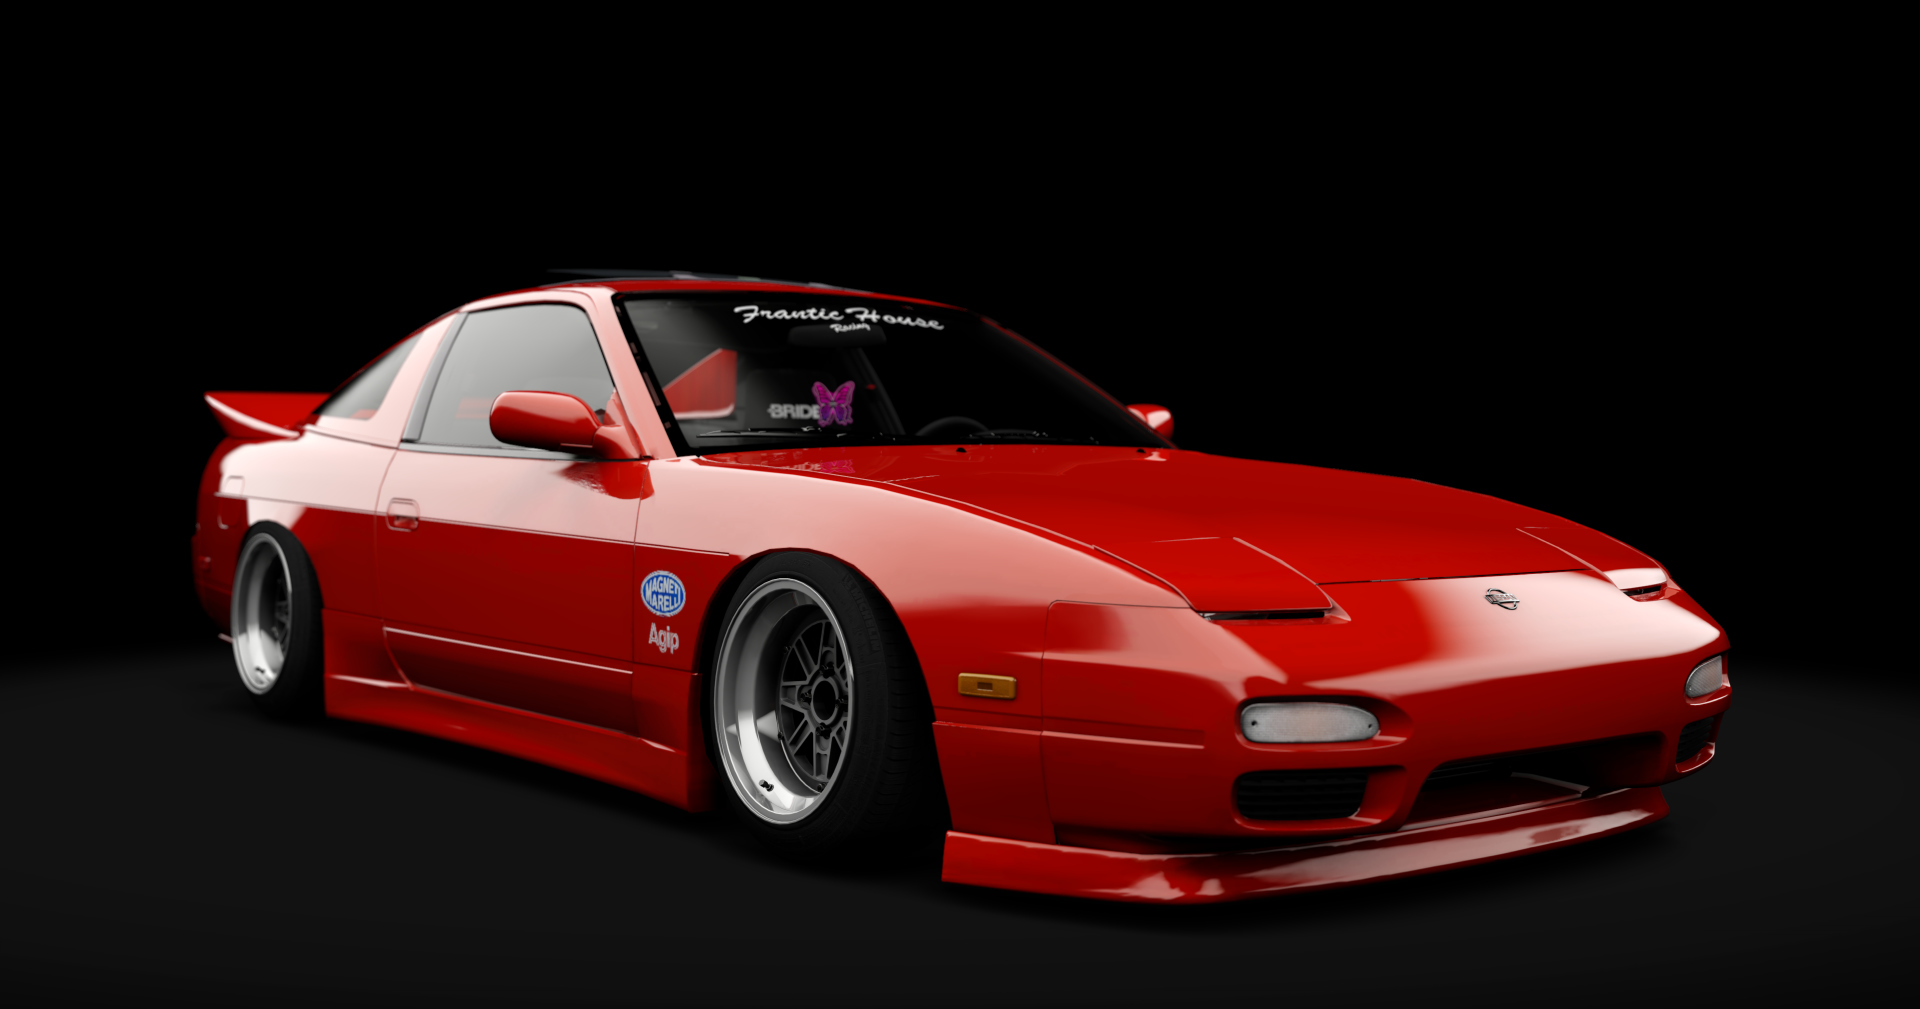 FranticHouseRacing 240sx Preview Image